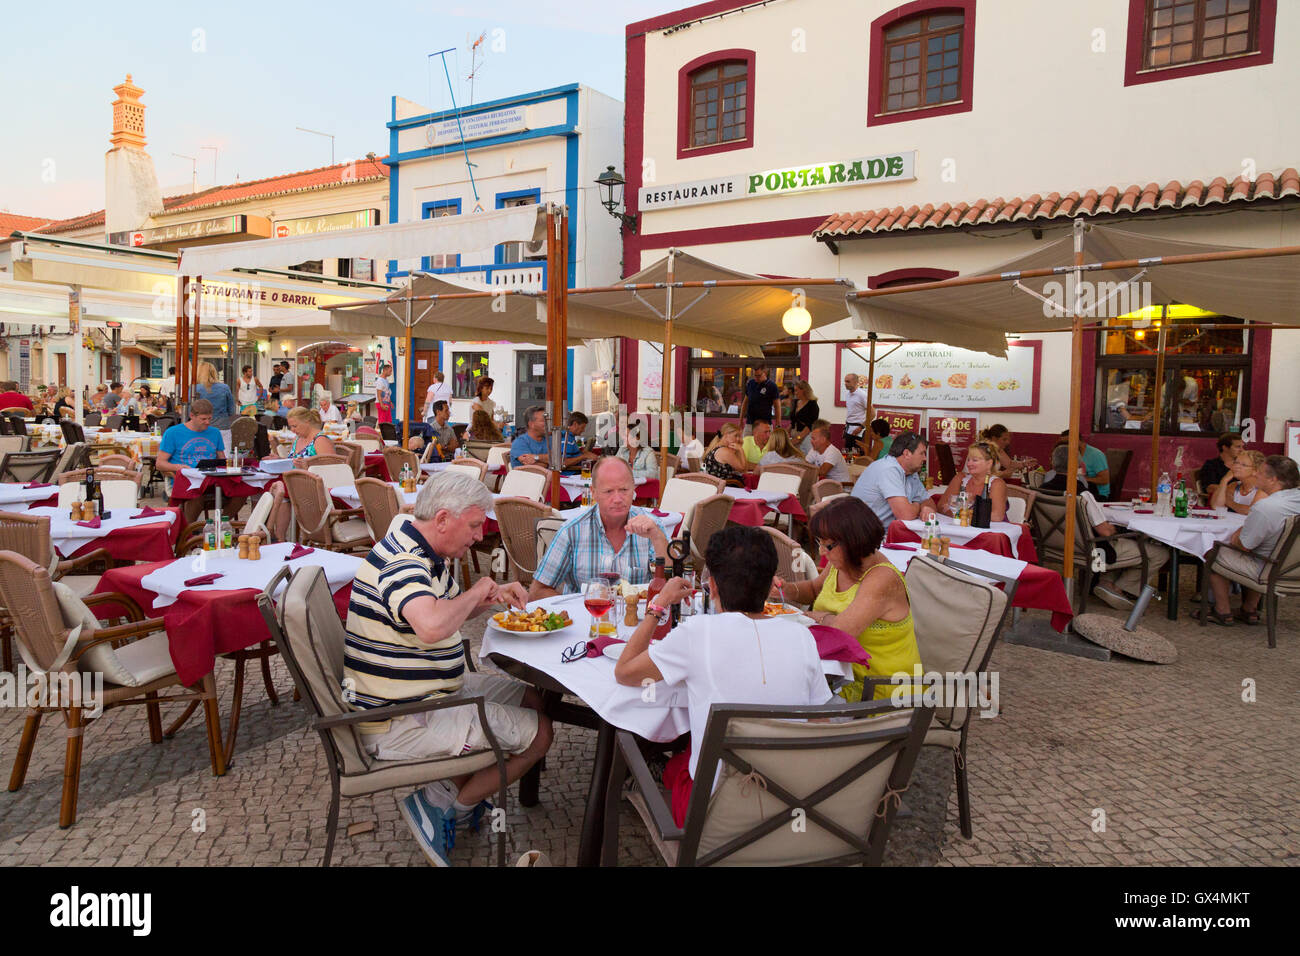 People eating outdoors in restaurants, the main square, Ferragudo, Algarve, Portugal Europe Stock Photo